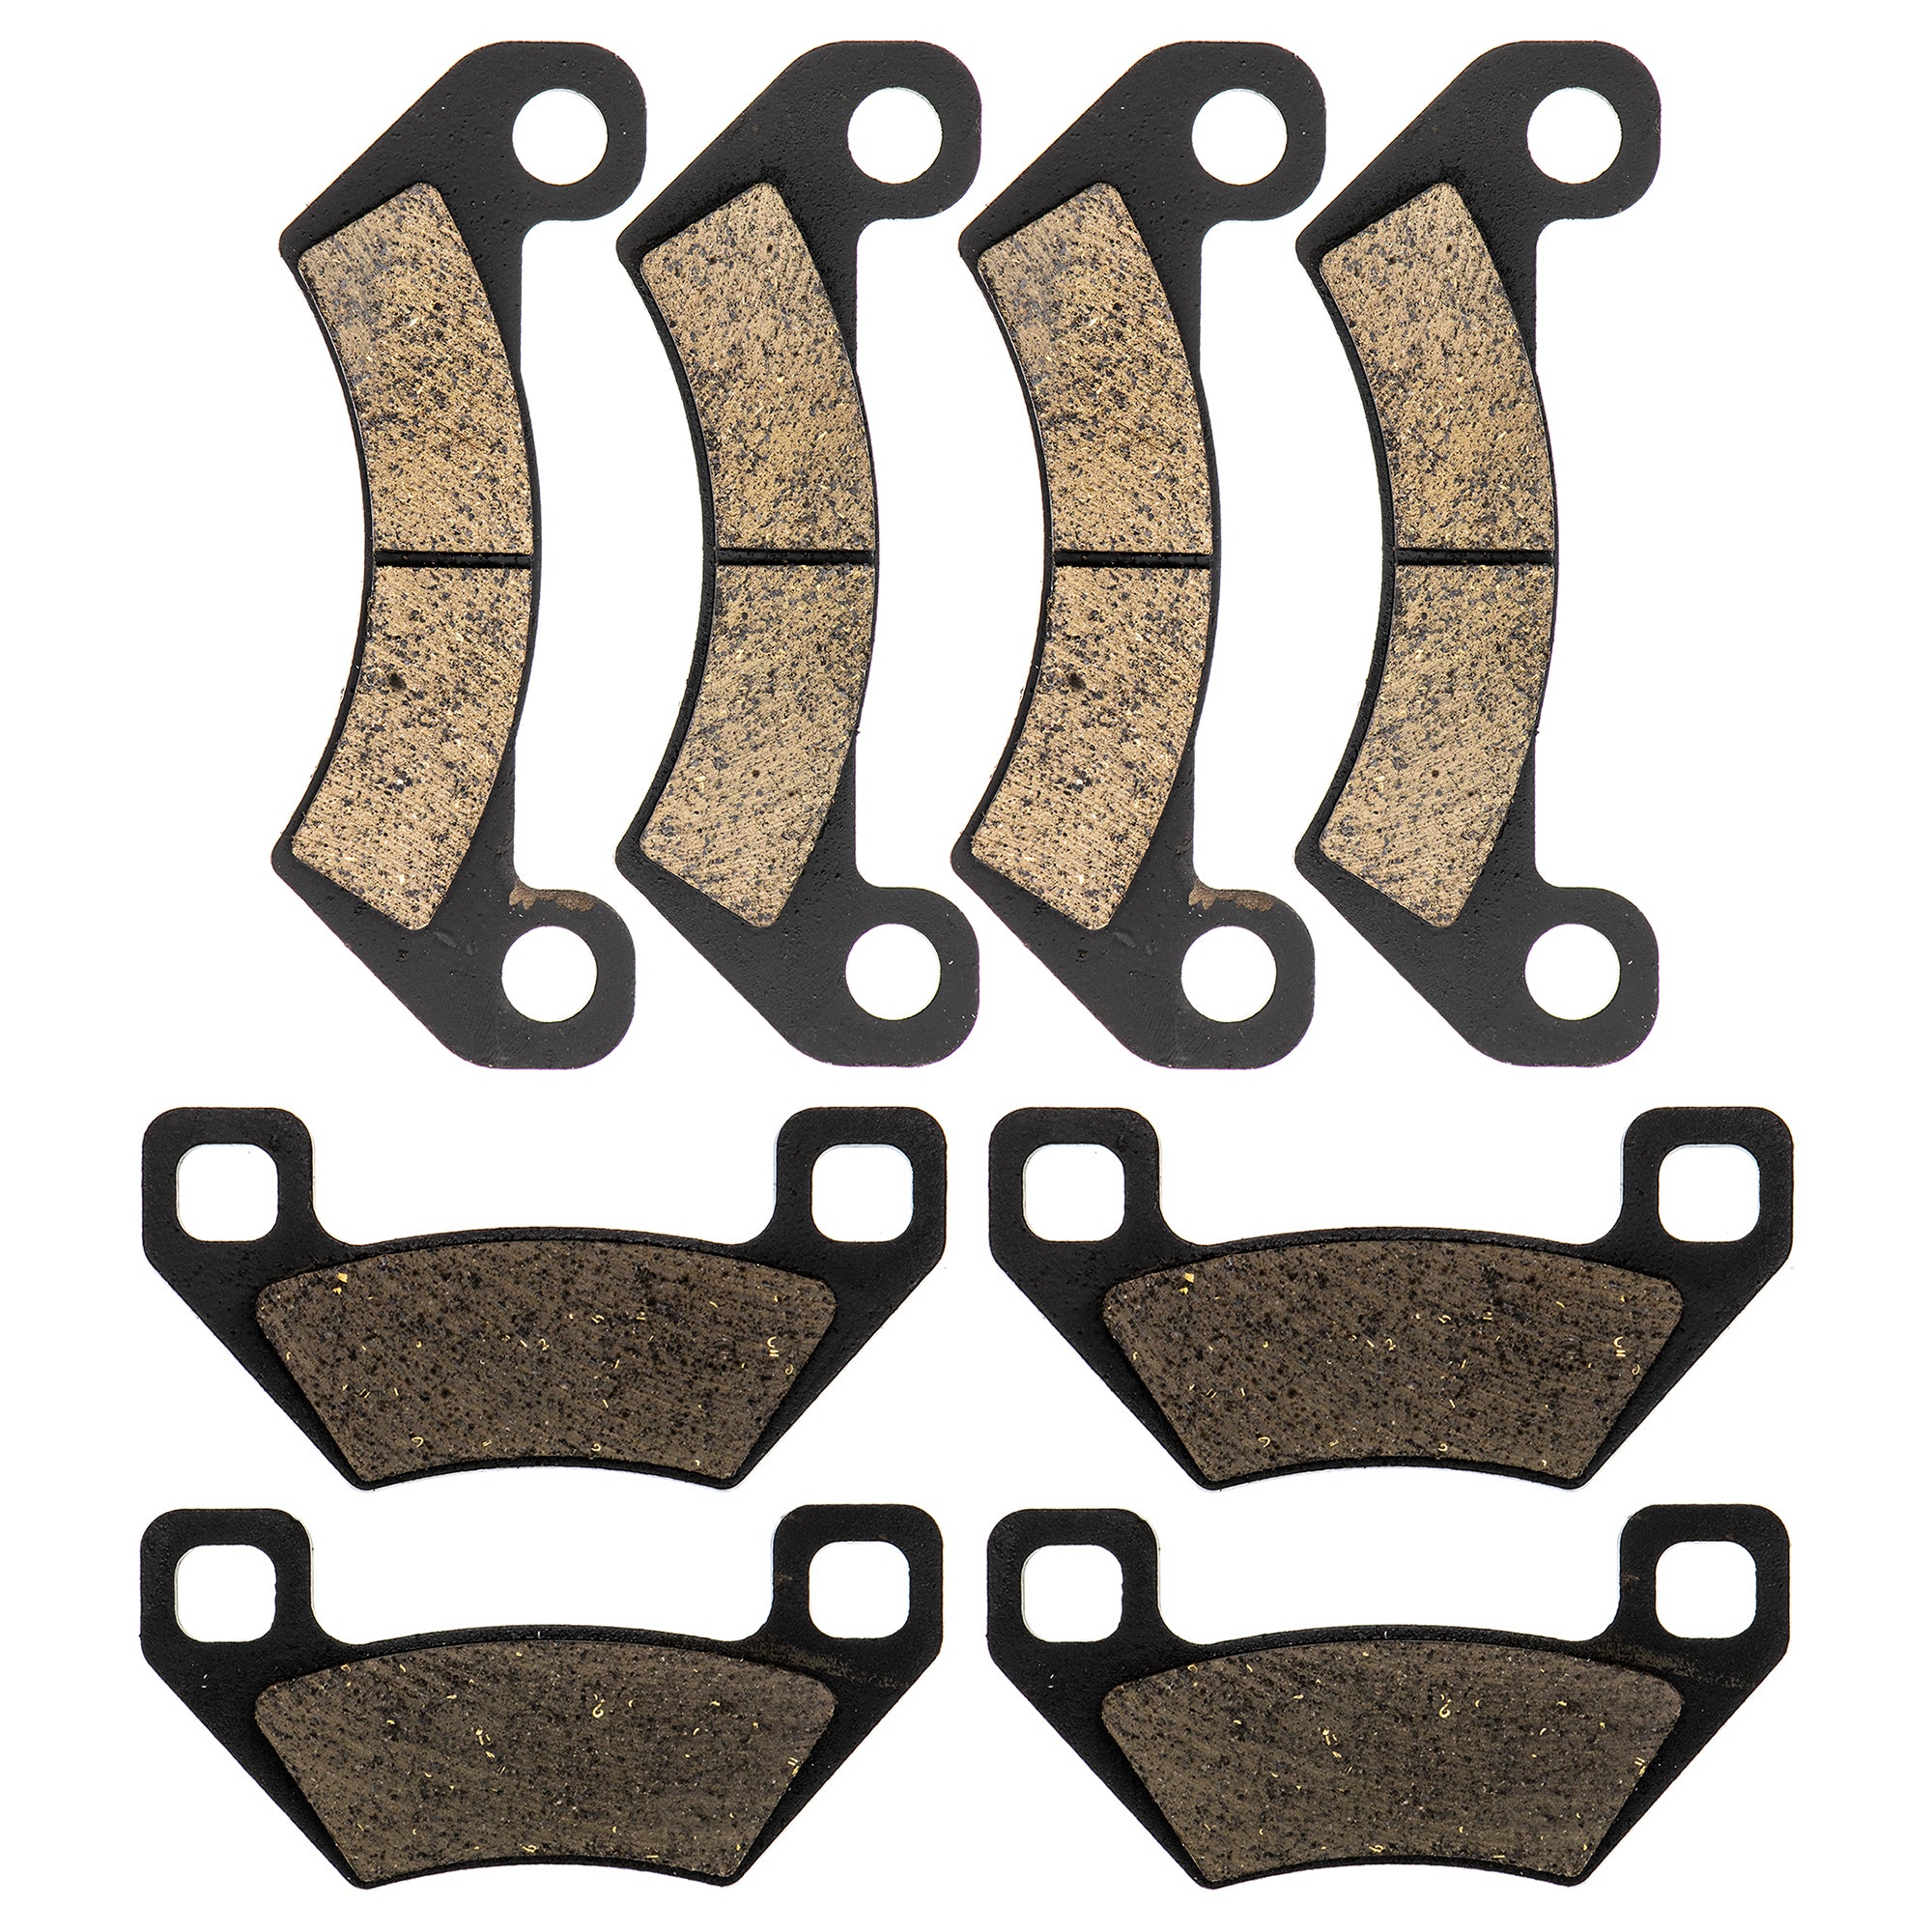 Brake Pad Kit Front/Rear for Arctic Cat Textron Cat 1436-420 1436-811 2502-034 3313-810 NICHE MK1002433